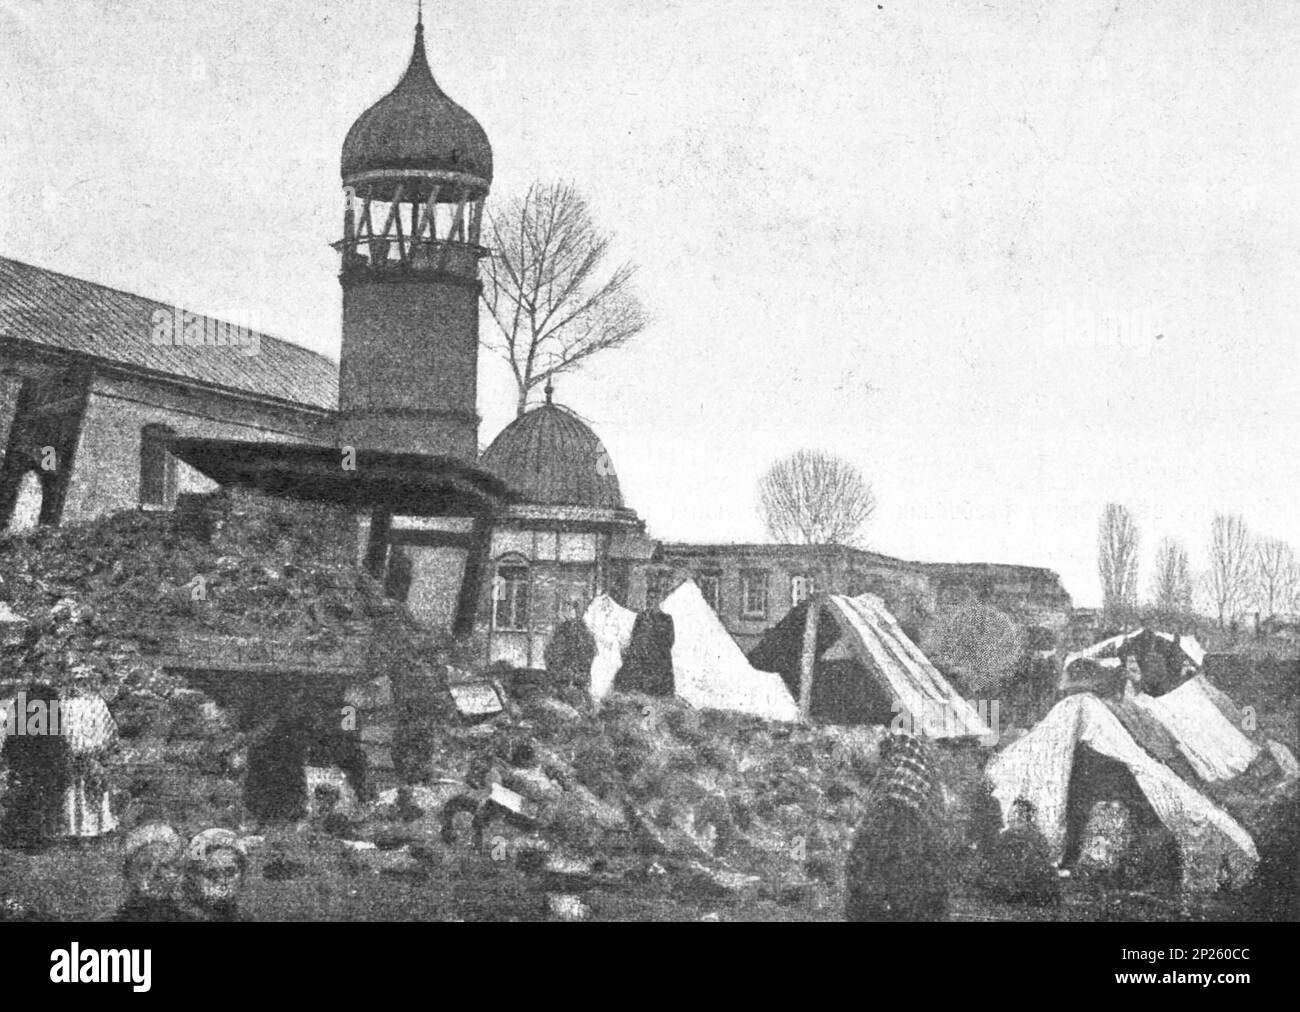 Earthquake in Shamakhi in 1902. A mosque and a school where 65 children died. Photo from 1902. Stock Photo